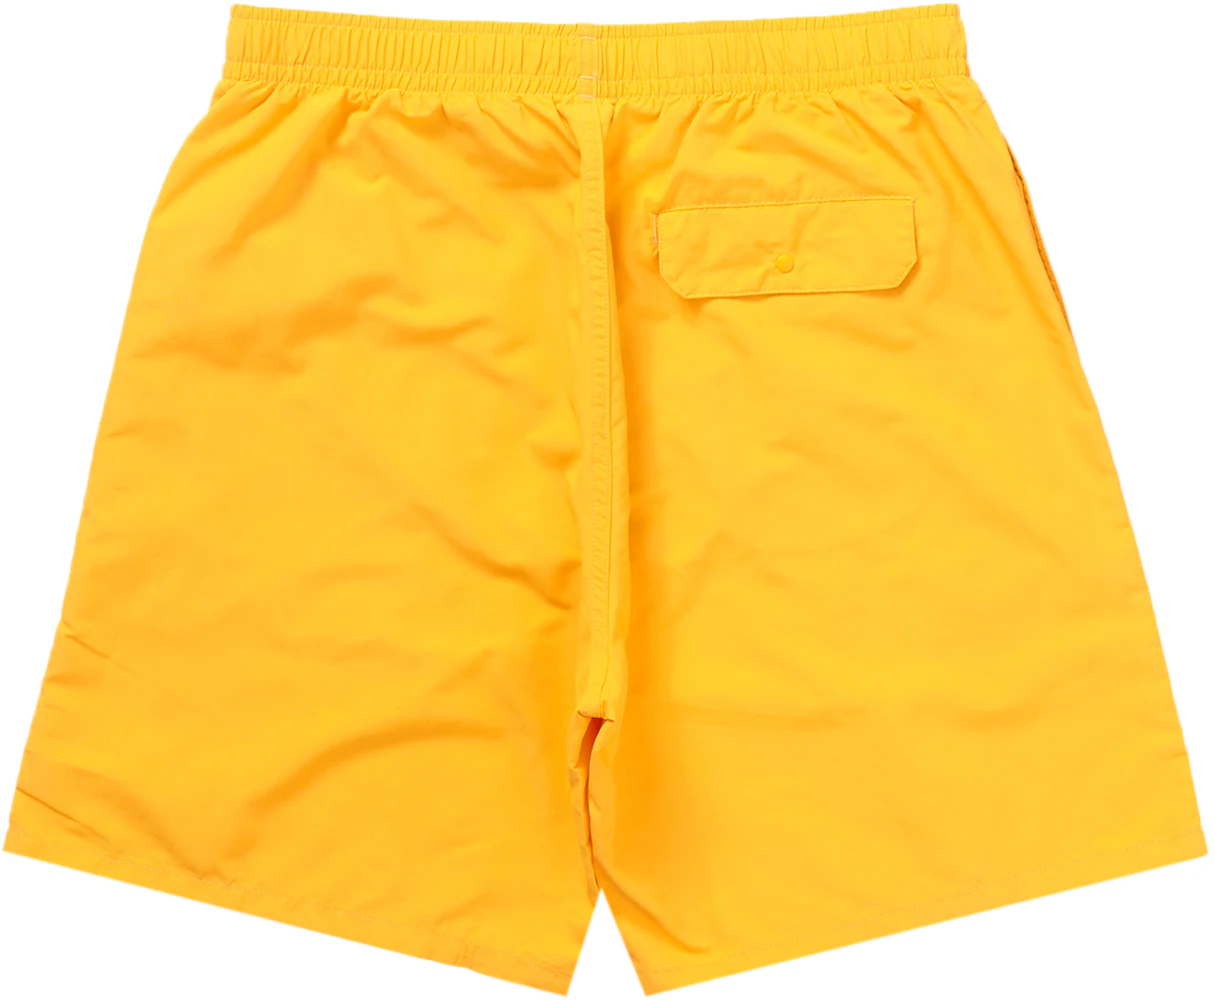 https://images.stockx.com/images/Supreme-Nylon-Water-Short-SS23-Yellow-2.jpg?fit=fill&bg=FFFFFF&w=700&h=500&fm=webp&auto=compress&q=90&dpr=2&trim=color&updated_at=1685634163?height=78&width=78